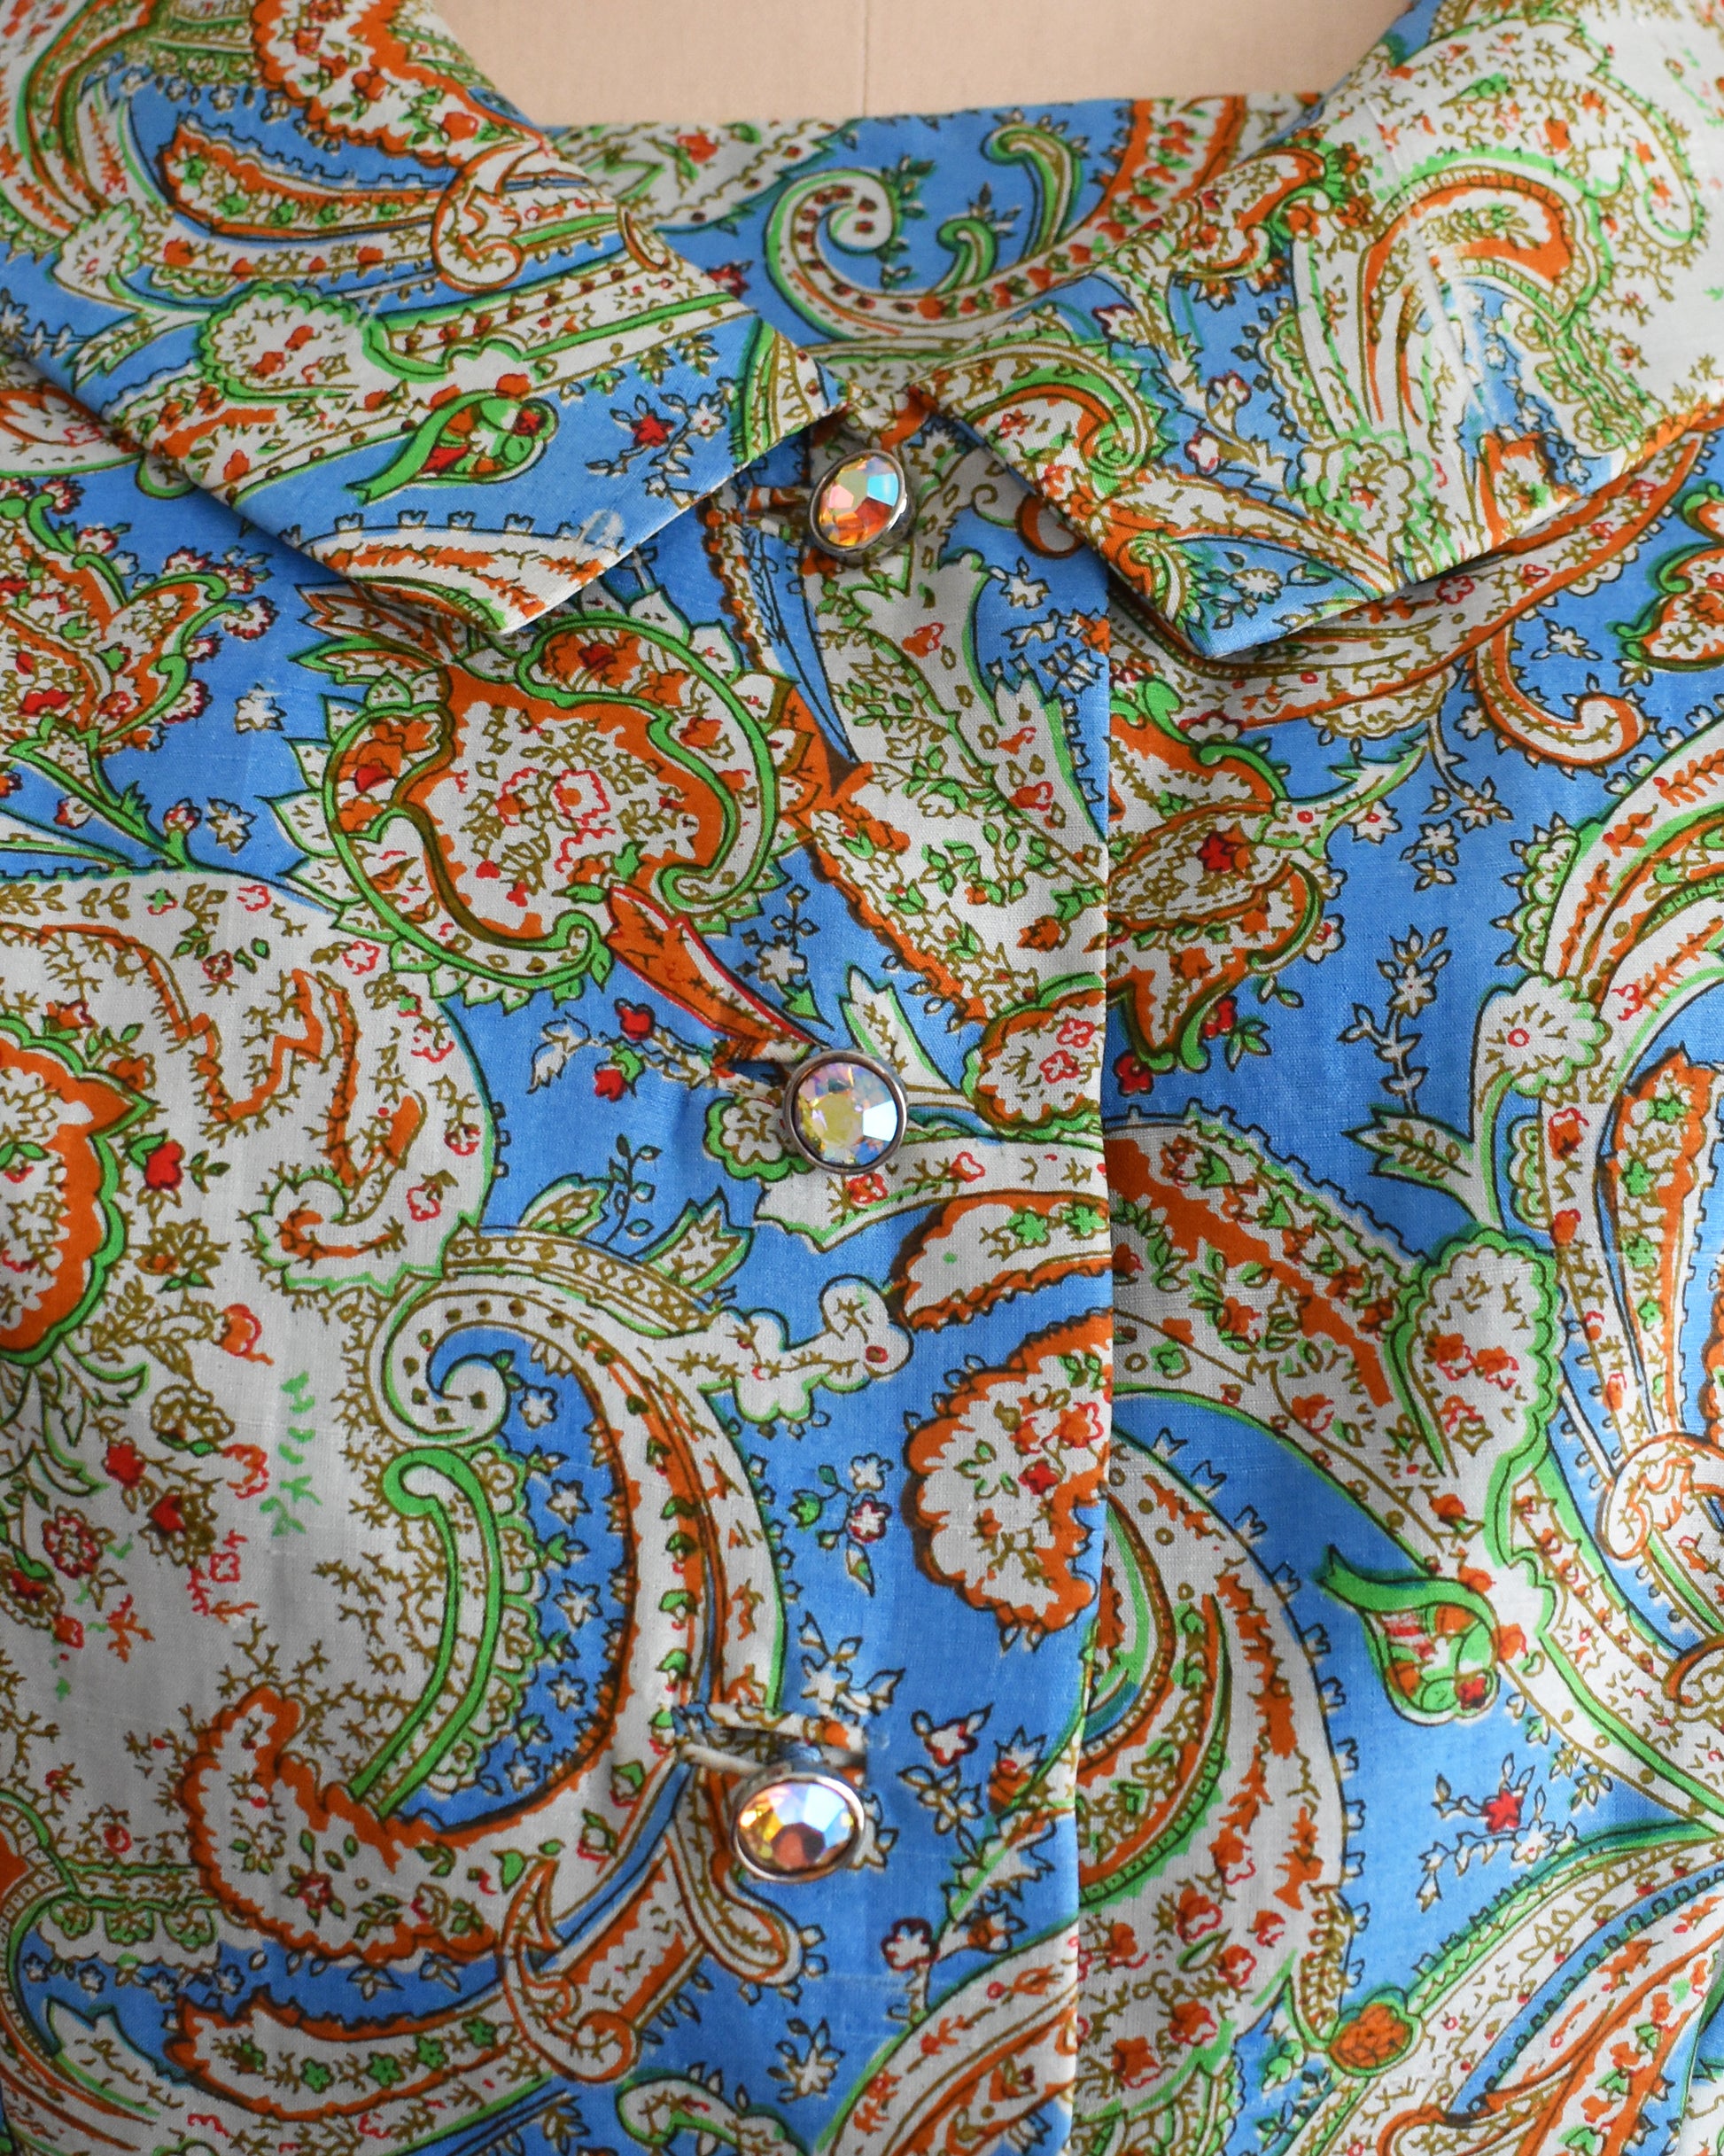 a close up version of the jacket, which shows the paisley print, and rhinestone buttons